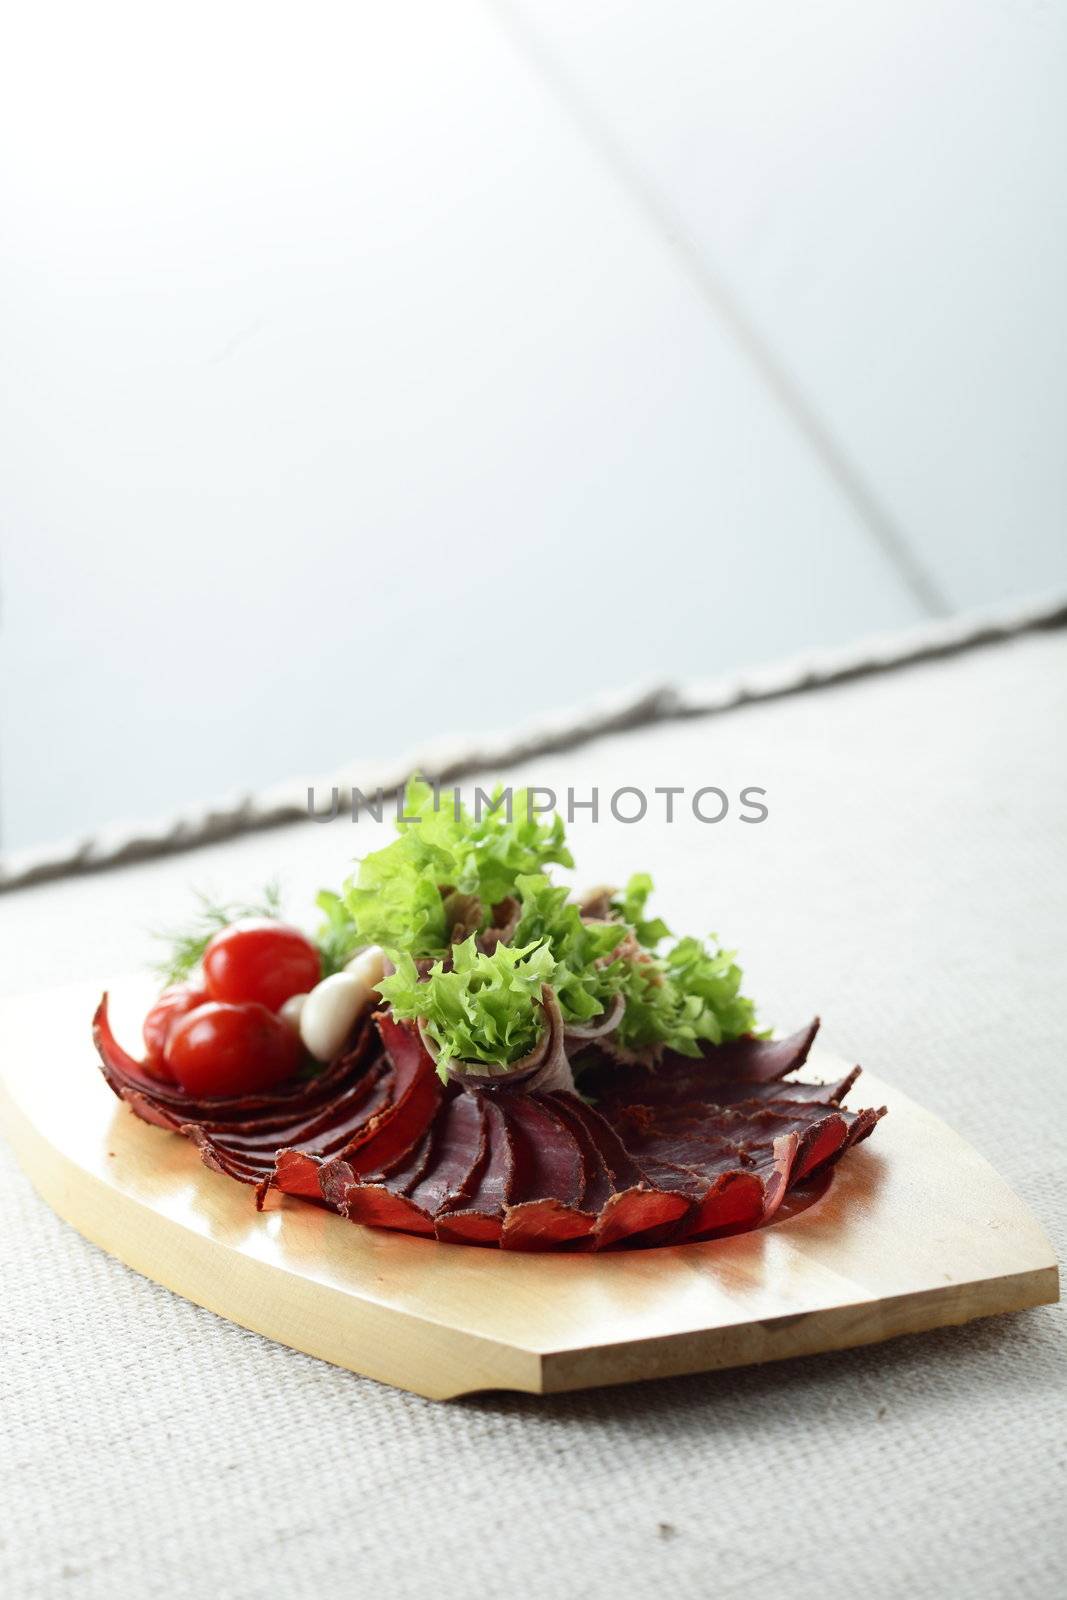 sliced bacon by fiphoto